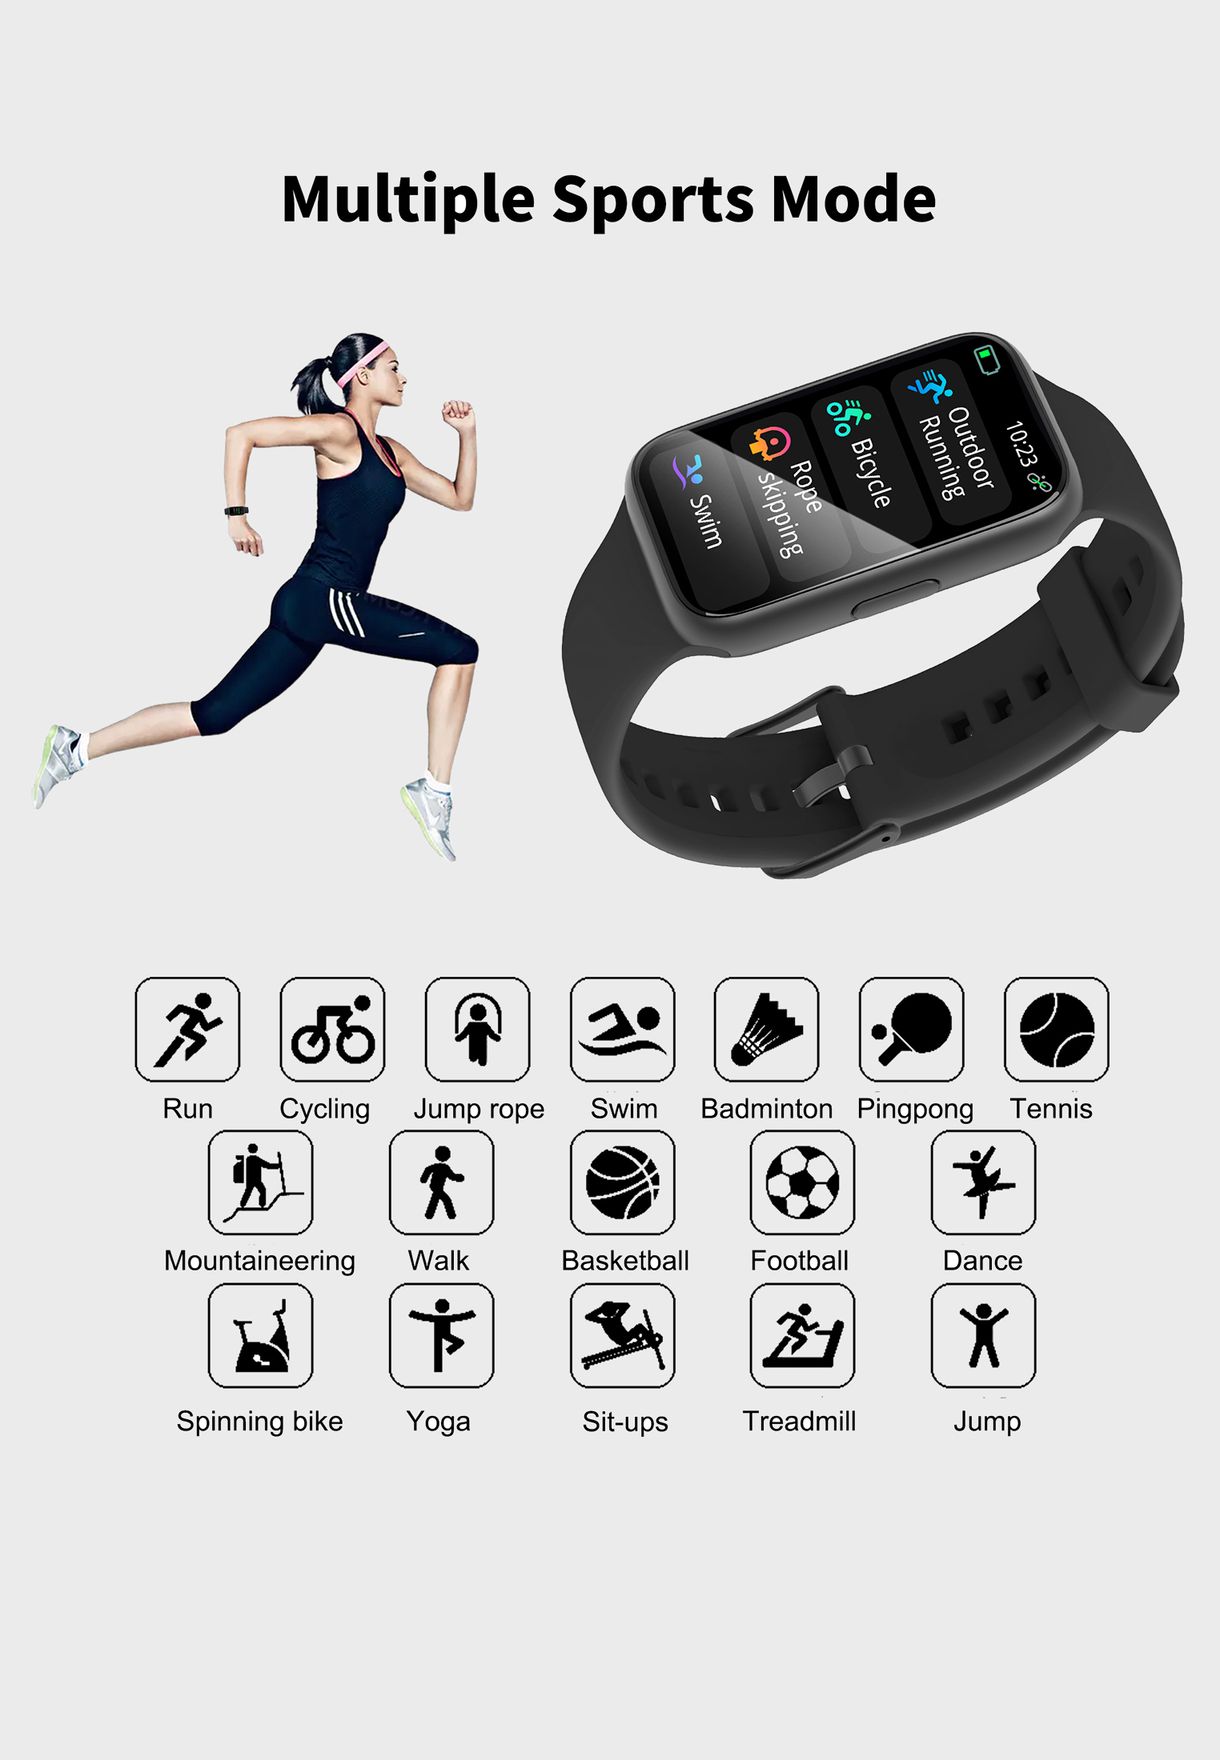 Smart Watch With Heart Rate, Blood Pressure And Bl